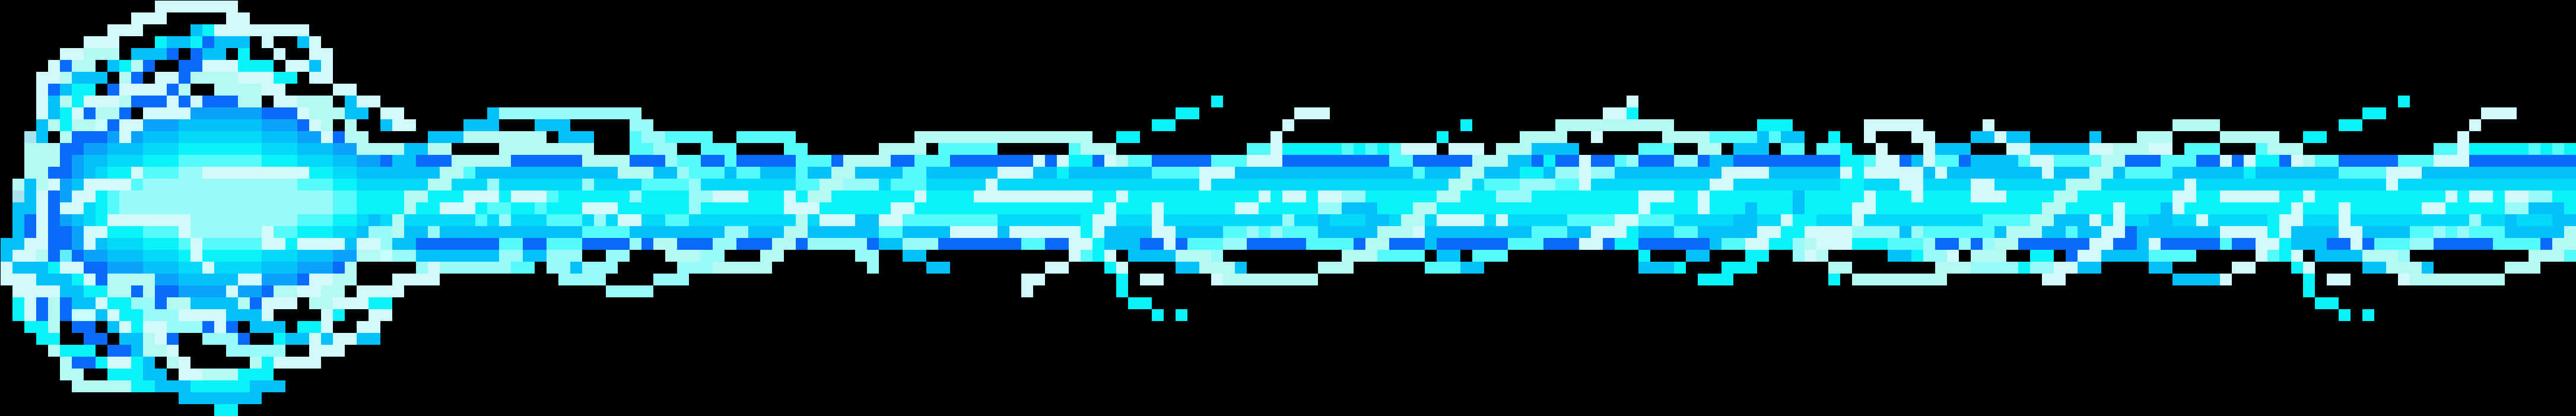 A Blue And White Pixelated Animal